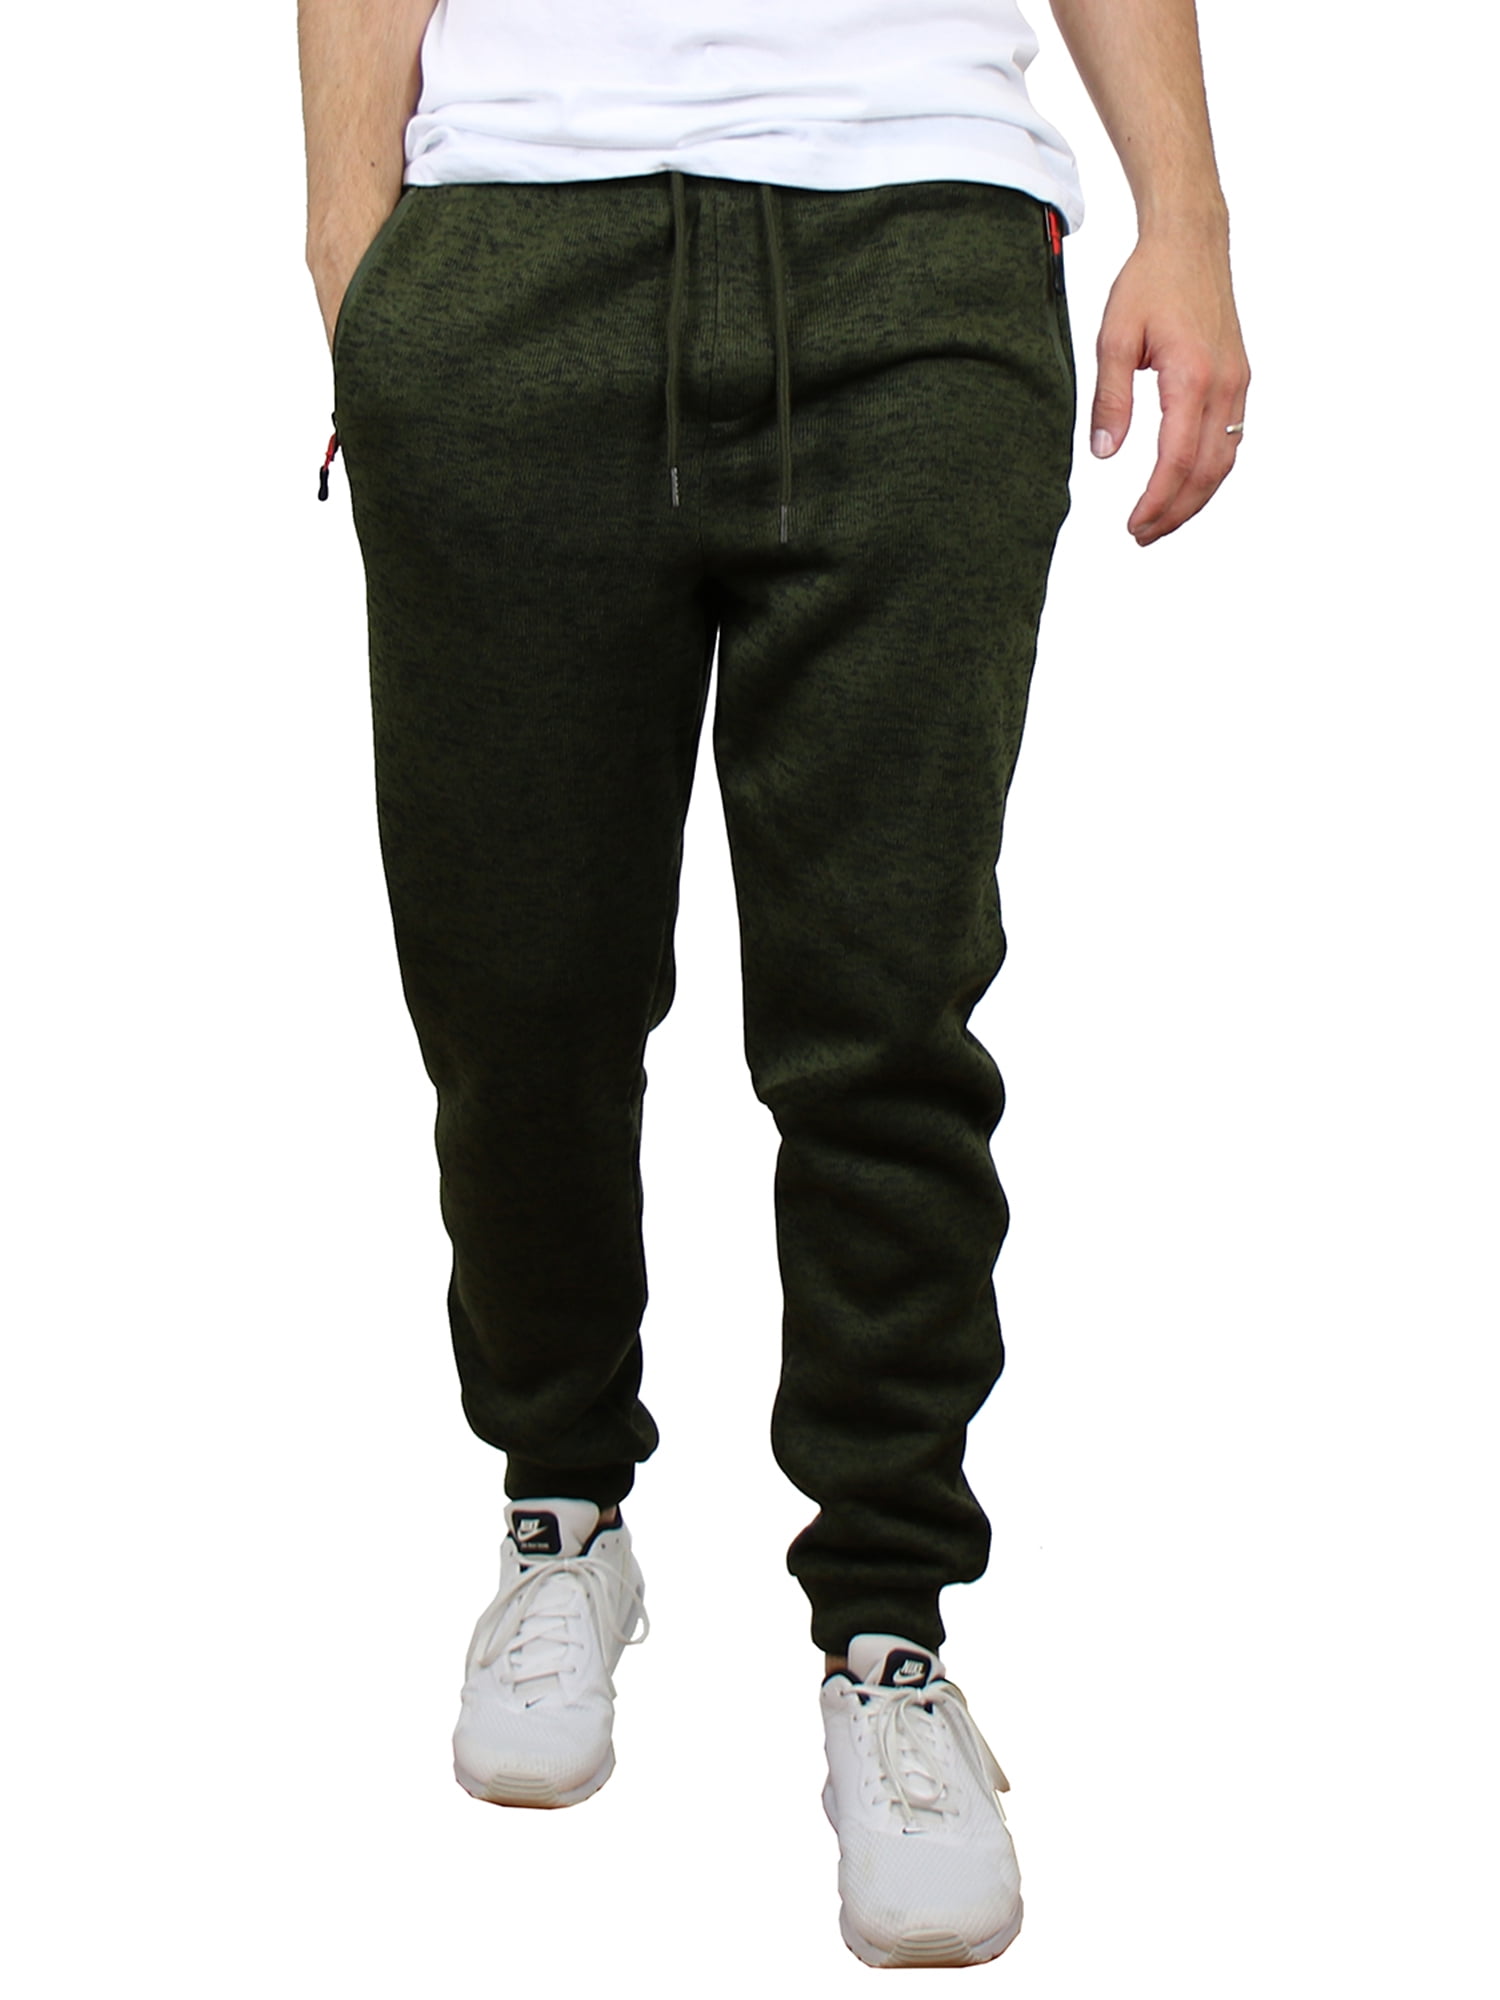 Men's Slim-Fit Marled Fleece Joggers With Zipper Side Pockets (Sizes, S ...